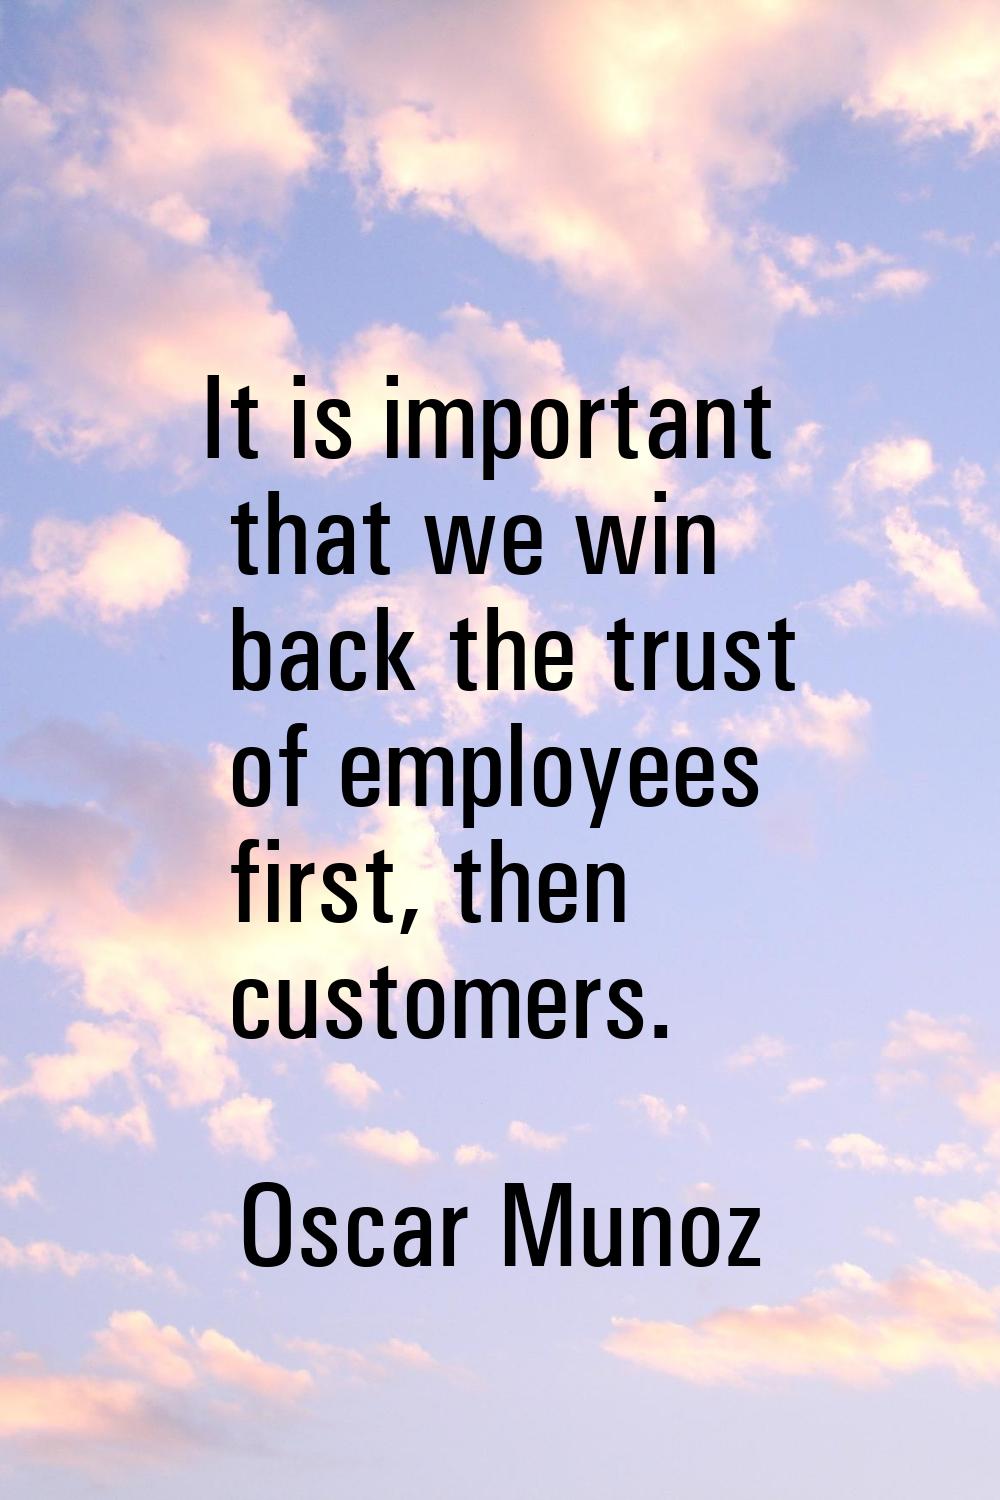 It is important that we win back the trust of employees first, then customers.